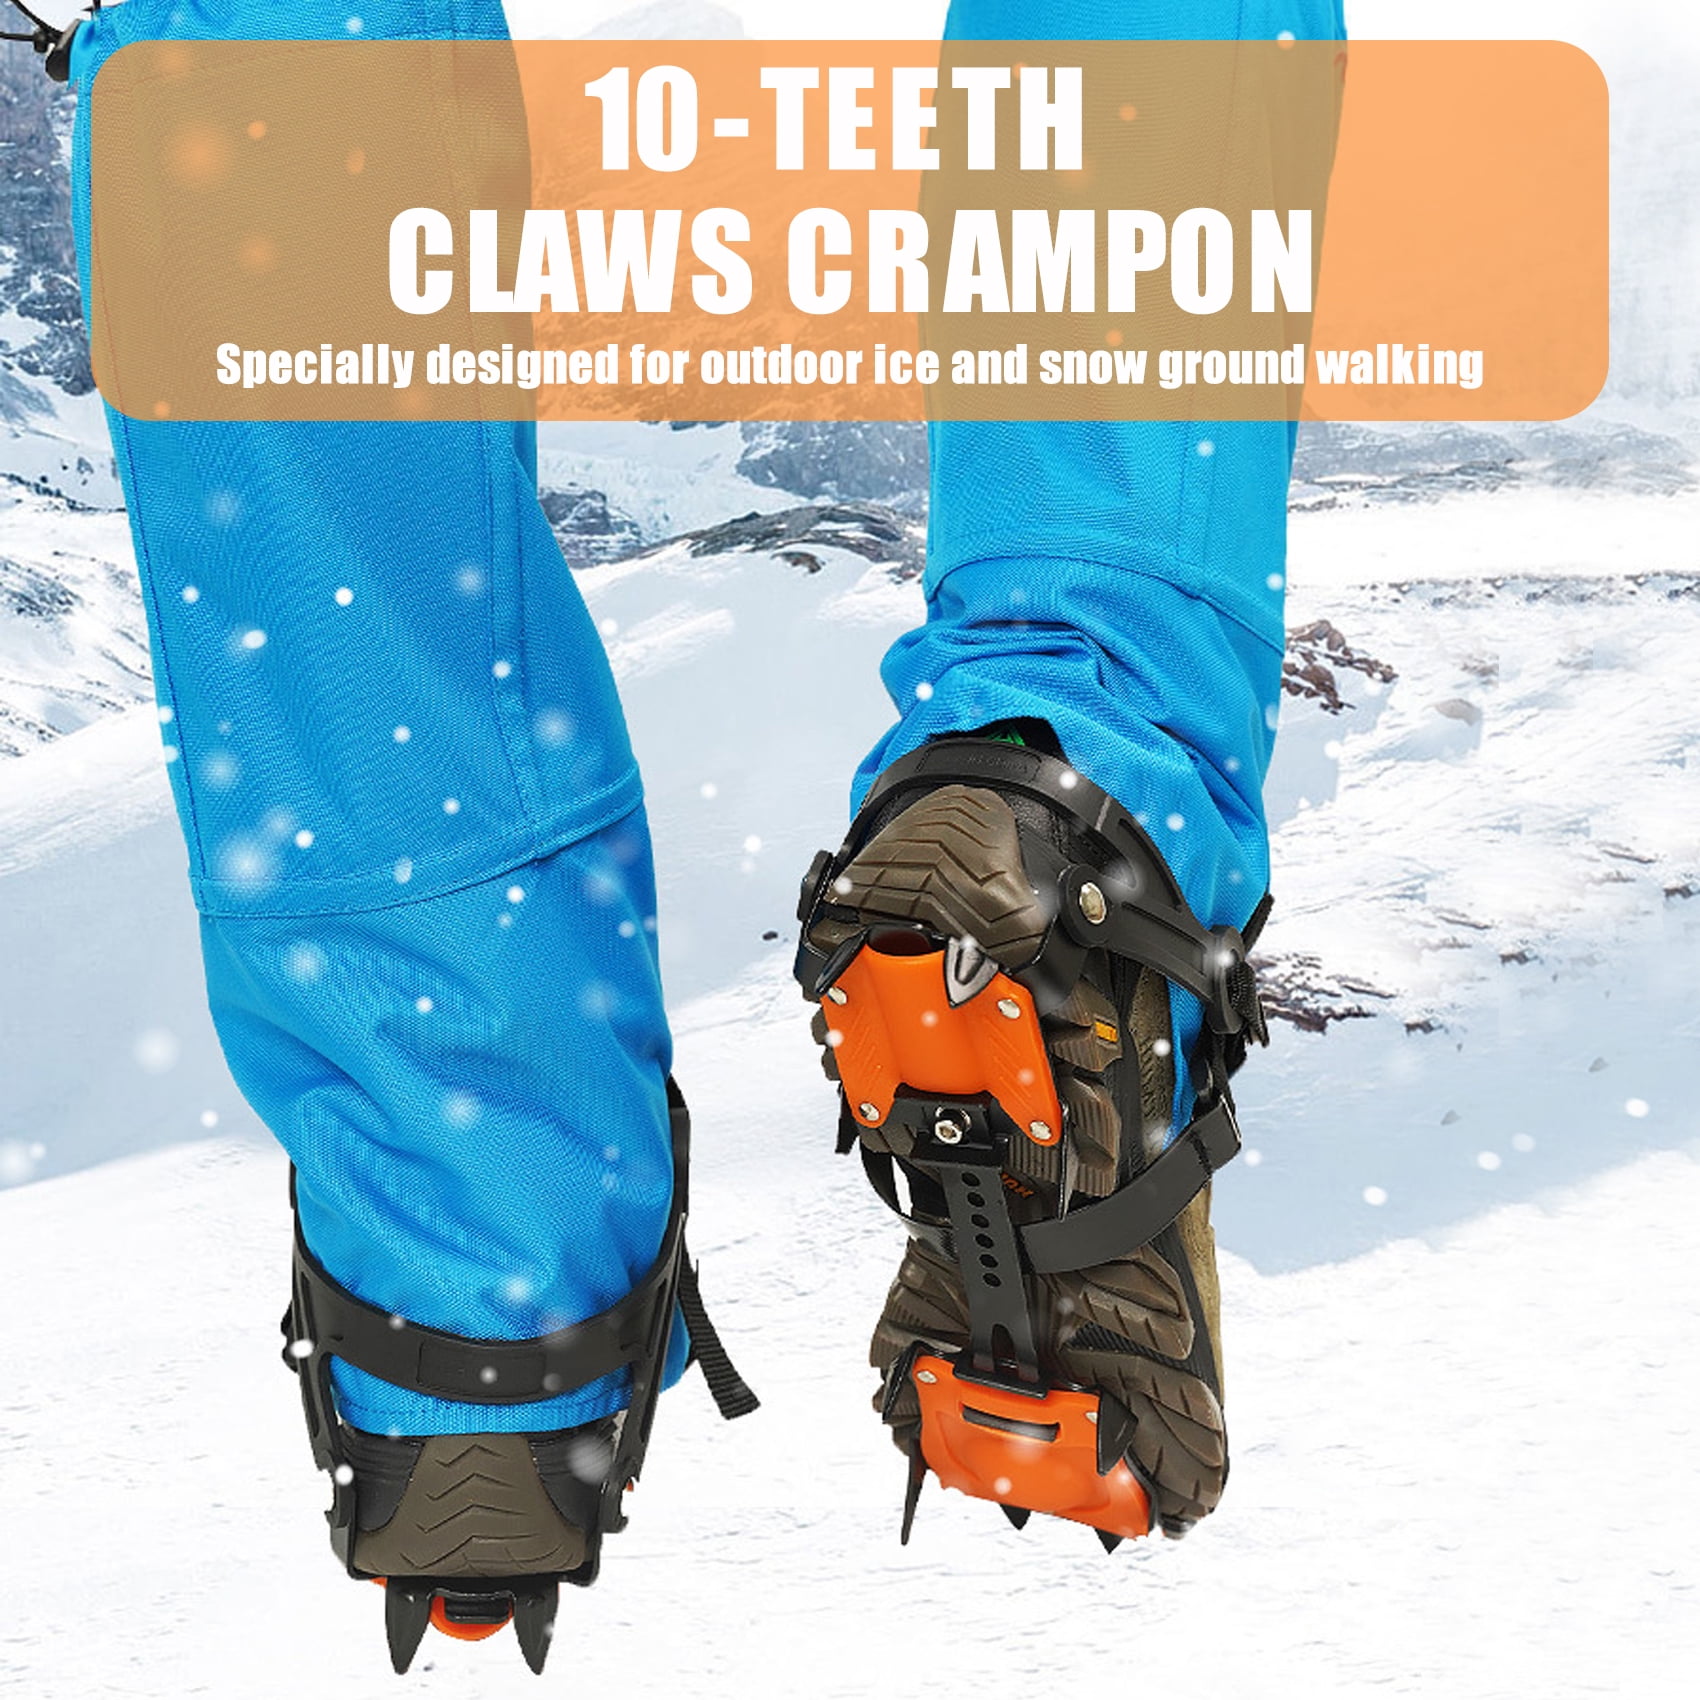 Hiking Trekking and Mountaineering in Winter 10 Teeth Ice Spikes Snow Grips for Shoes and boots Anti Slip Shoes Stainless Steel Spikes Ice Cleat for Walking HEWOLF Crampons Ice Snow Grips 